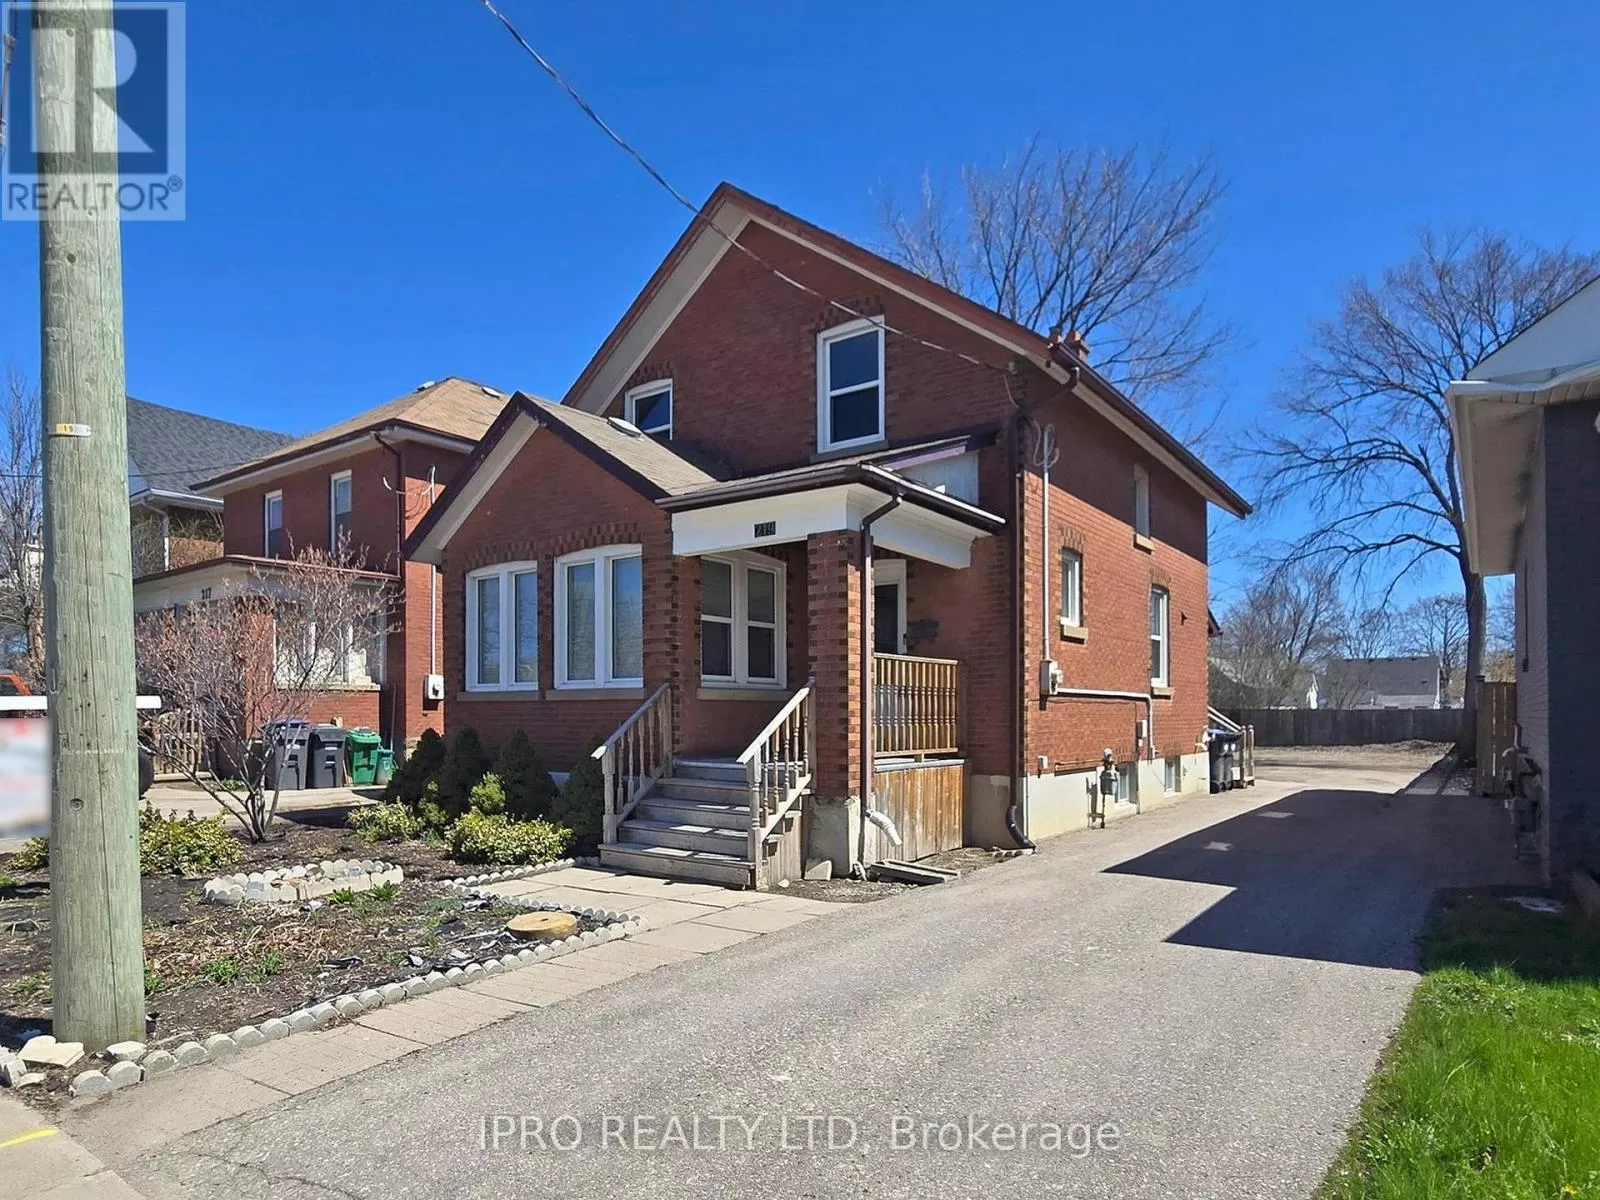 House for rent: 219 Queen St W, Brampton, Ontario L6Y 1M6